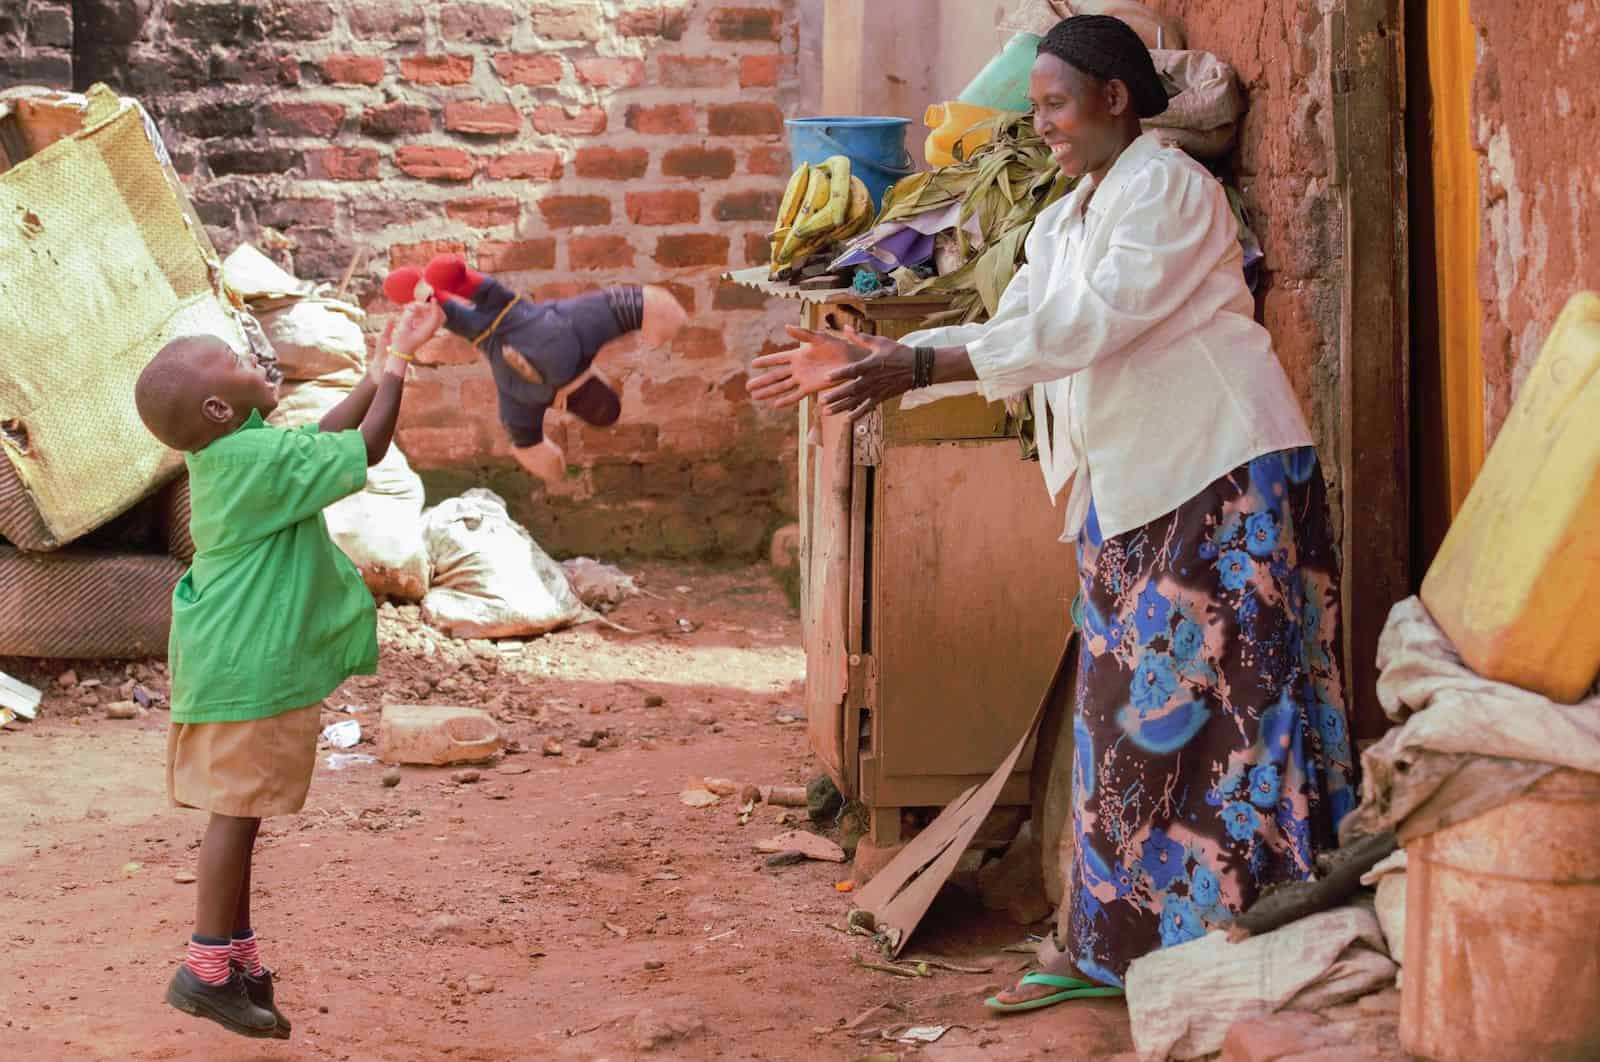 Waardenburg Syndrome Pictures: a boy with partial albinism tosses a toy outside a home to an older woman.